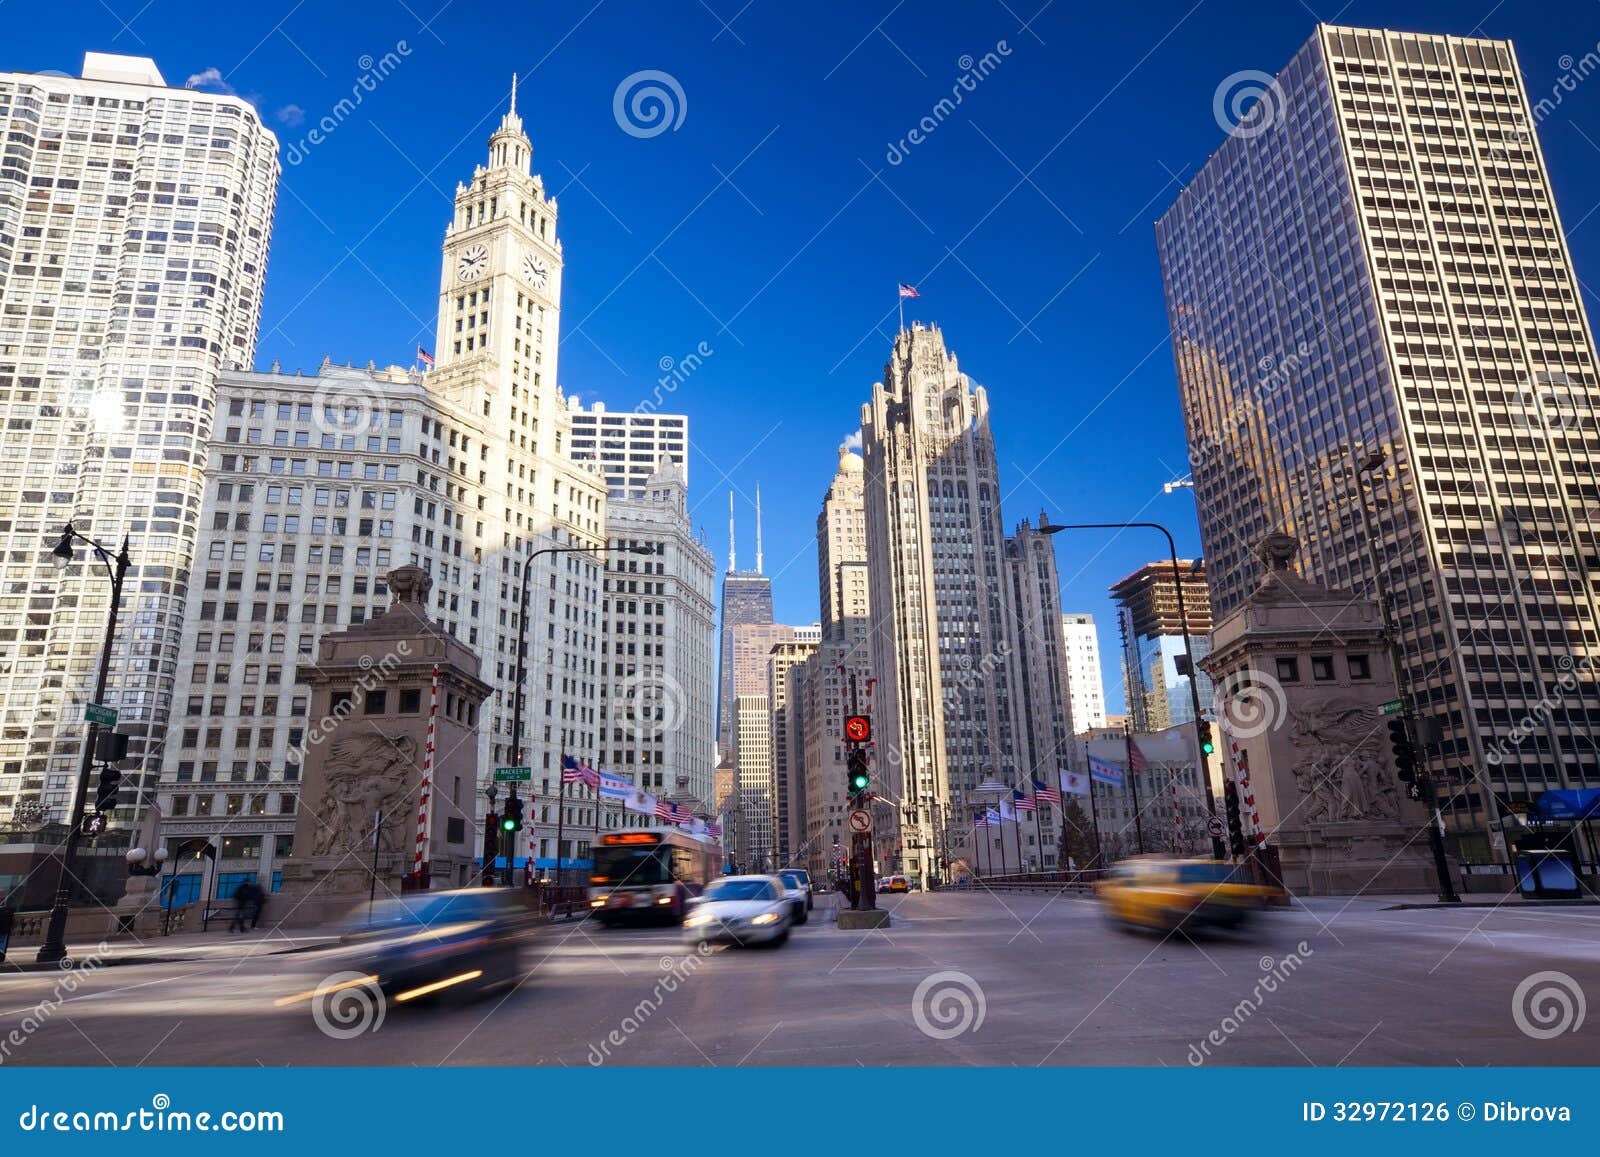 magnificent mile in chicago